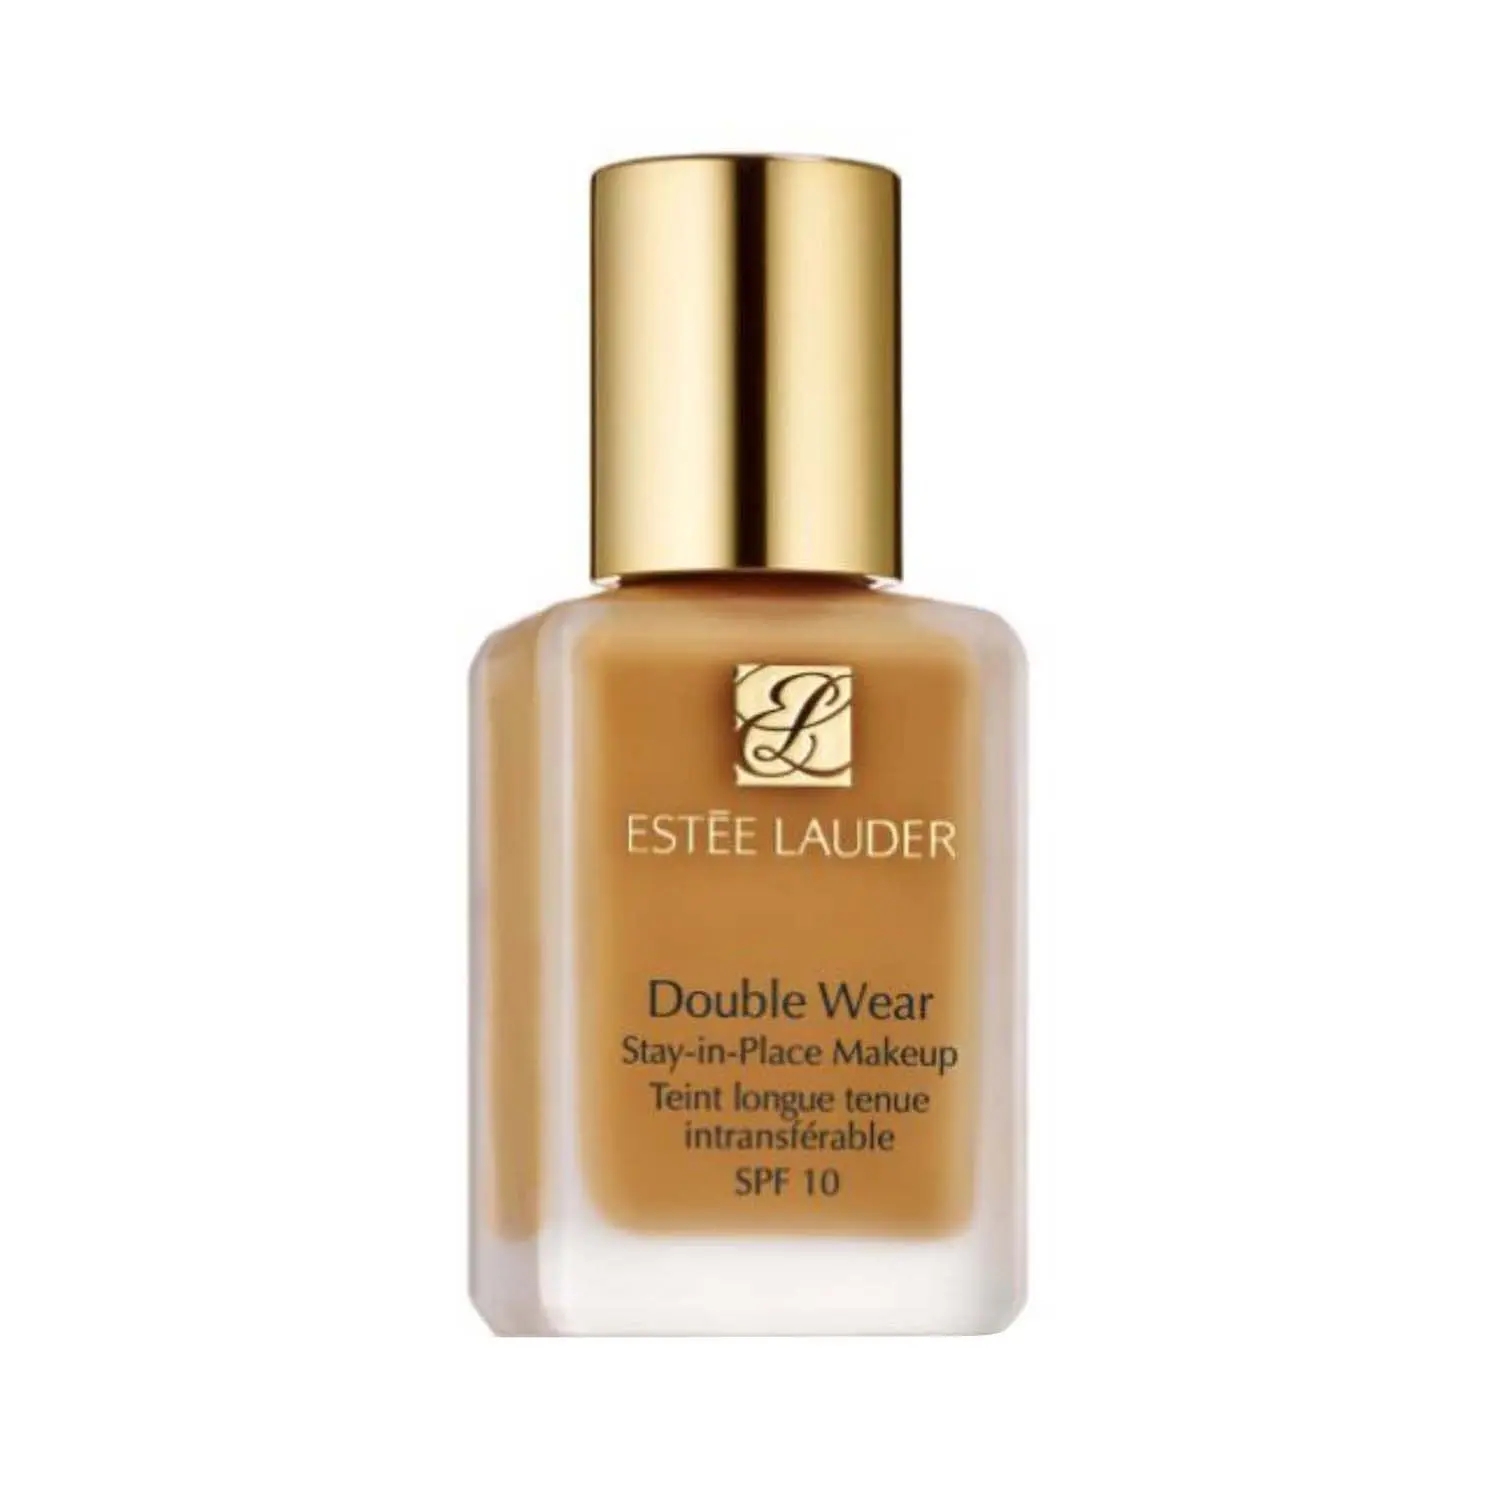 Estee Lauder | Estee Lauder Double Wear Stay-In-Place Makeup Foundation SPF 10 - 4N2 Spiced Sand (30ml)